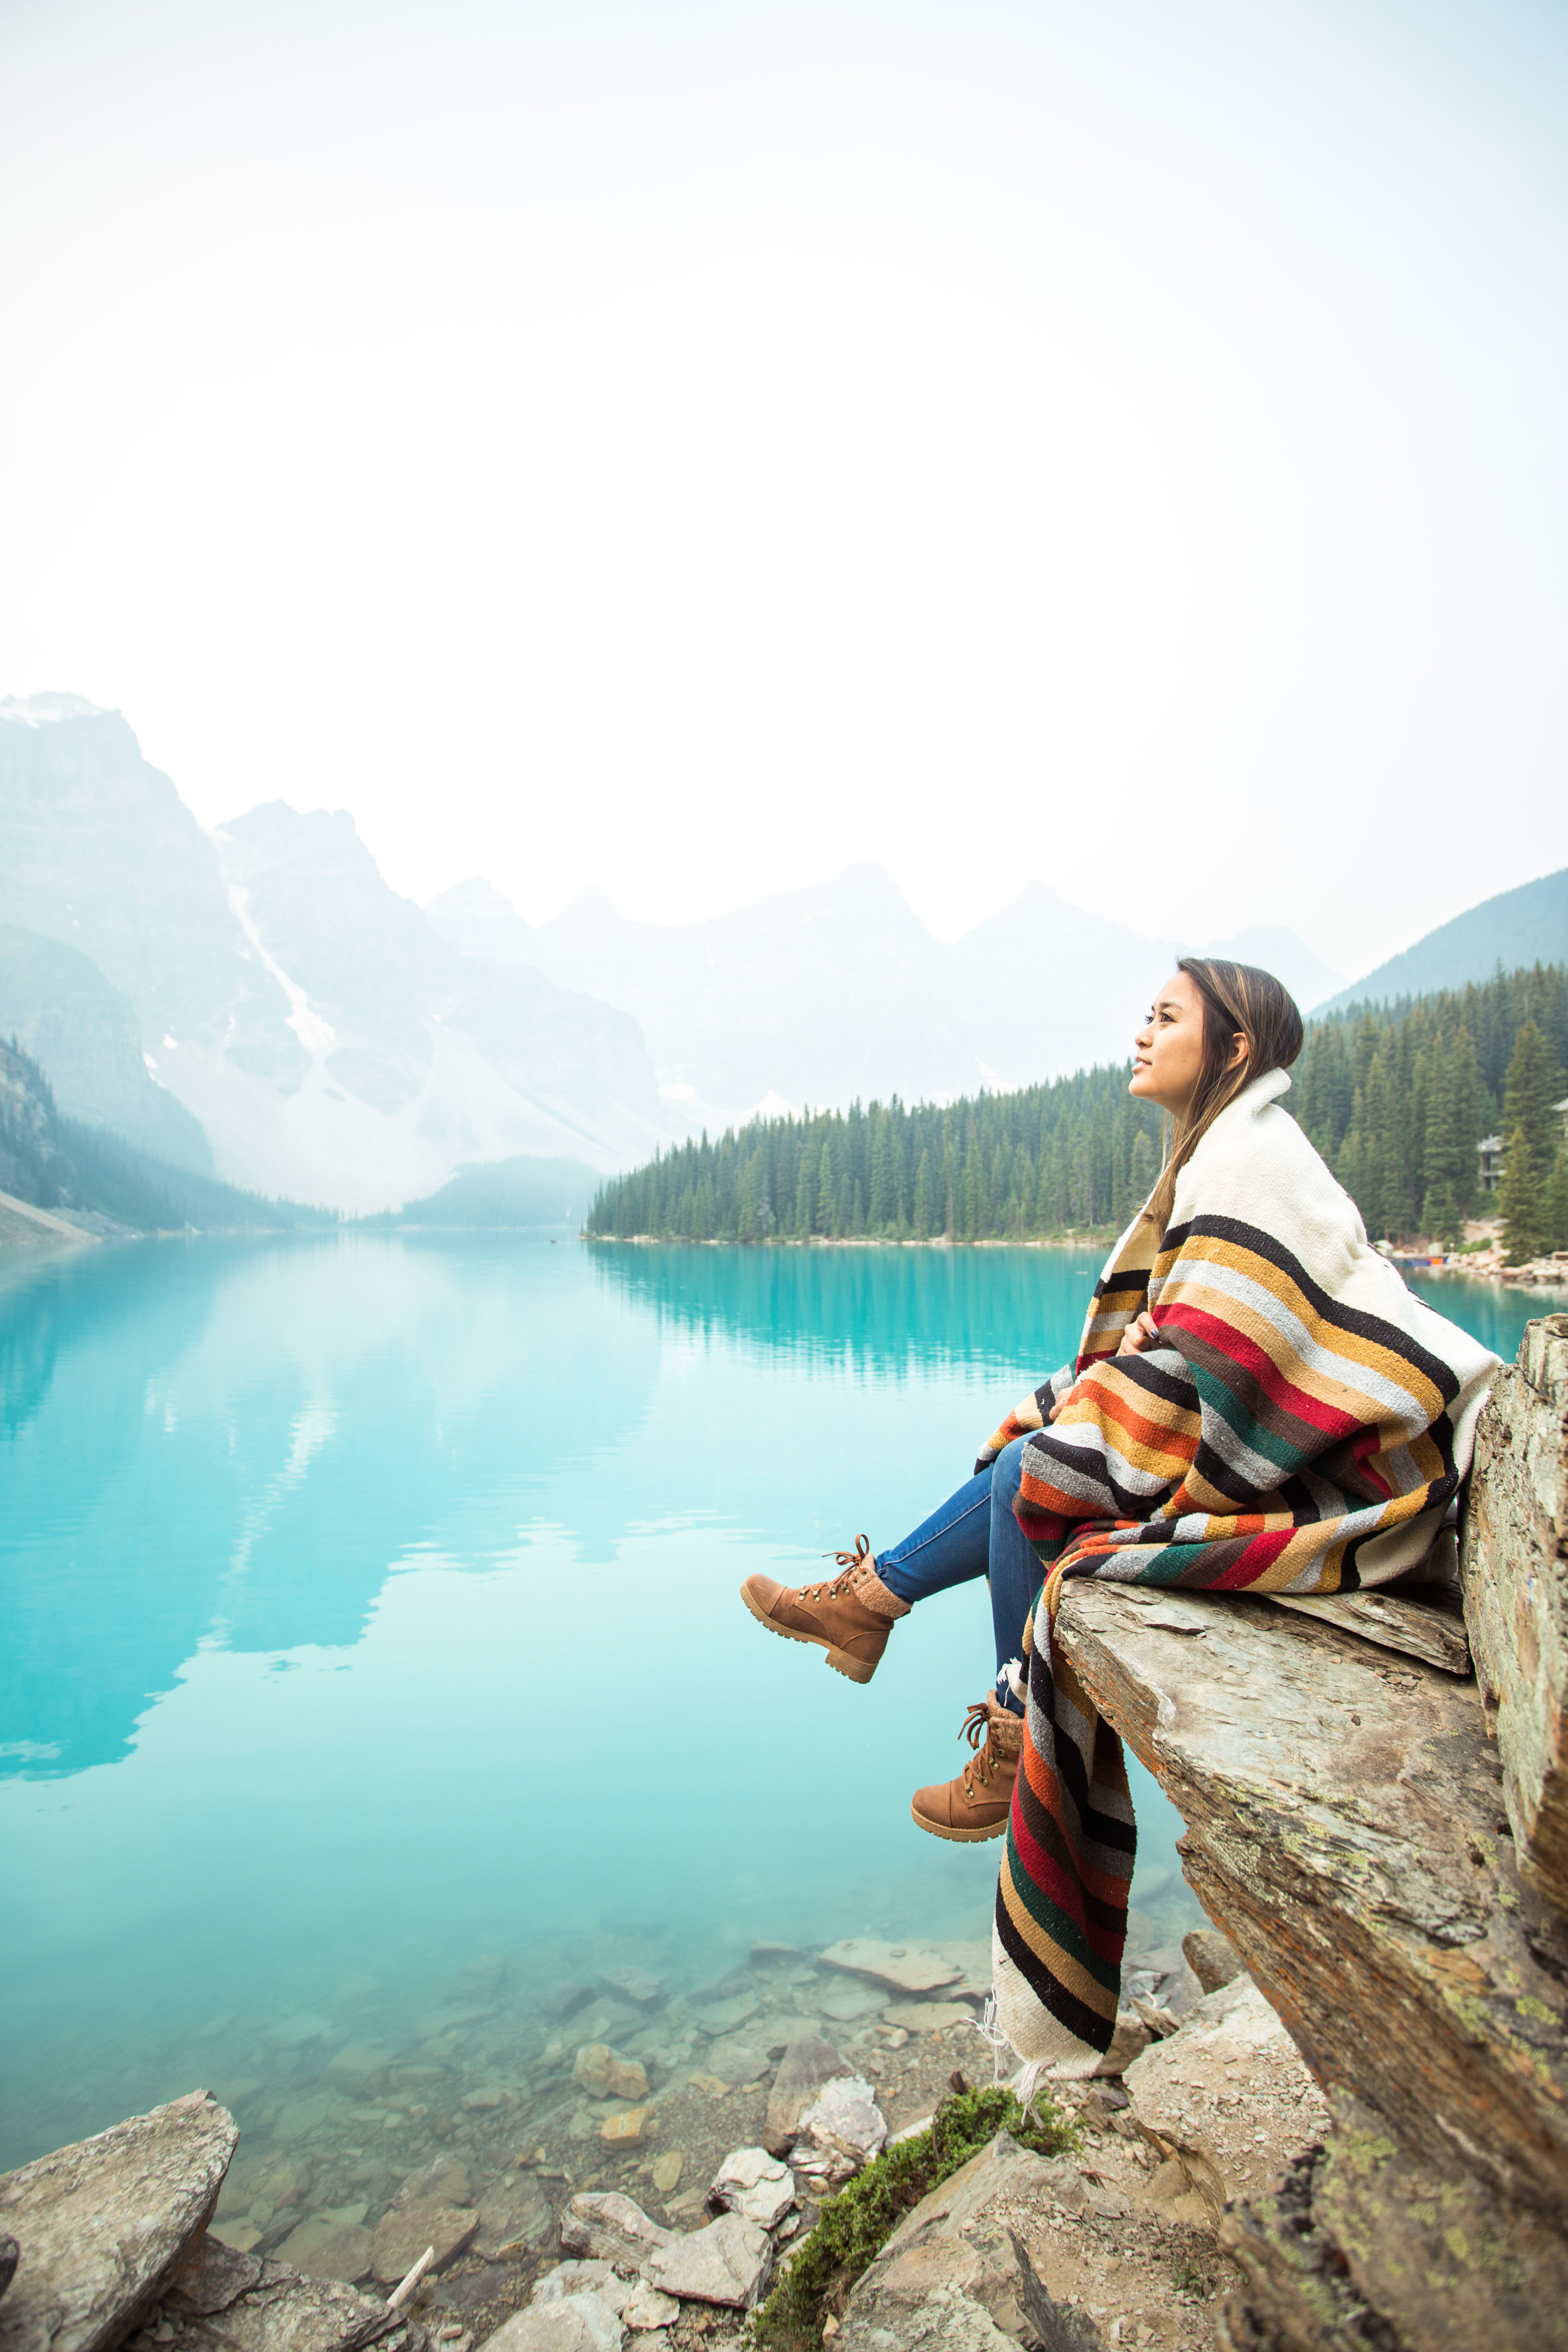 The Best 4-Day Canadian Rockies Itinerary, Banff National Park, Jasper National Park, Yoho National Park, Alberta, British Columbia, Canadian Rockies, Banff Itinerary, Jasper Itinerary